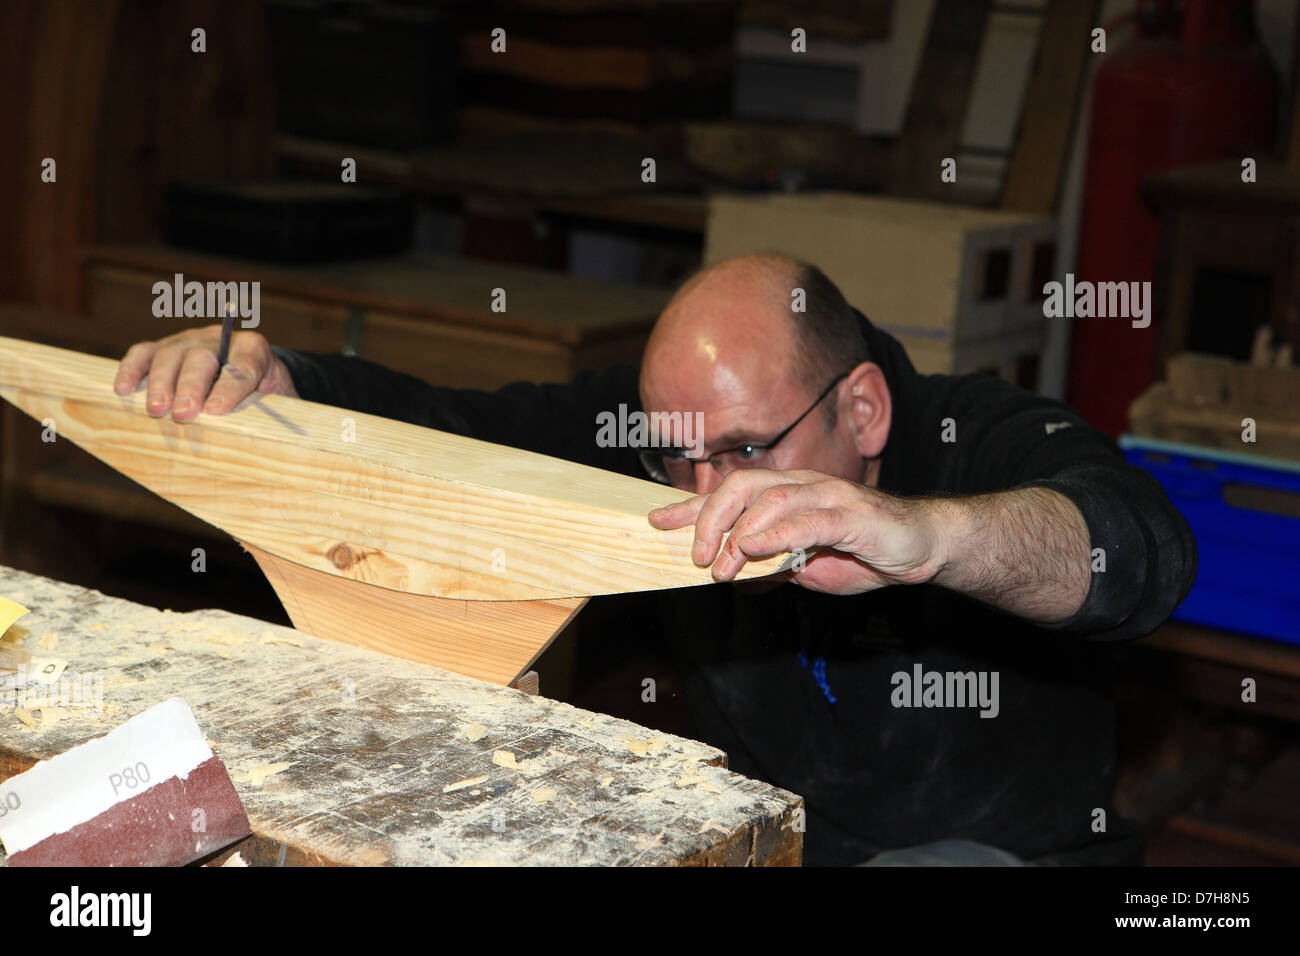 Man making a half hull model in a workshop Stock Photo